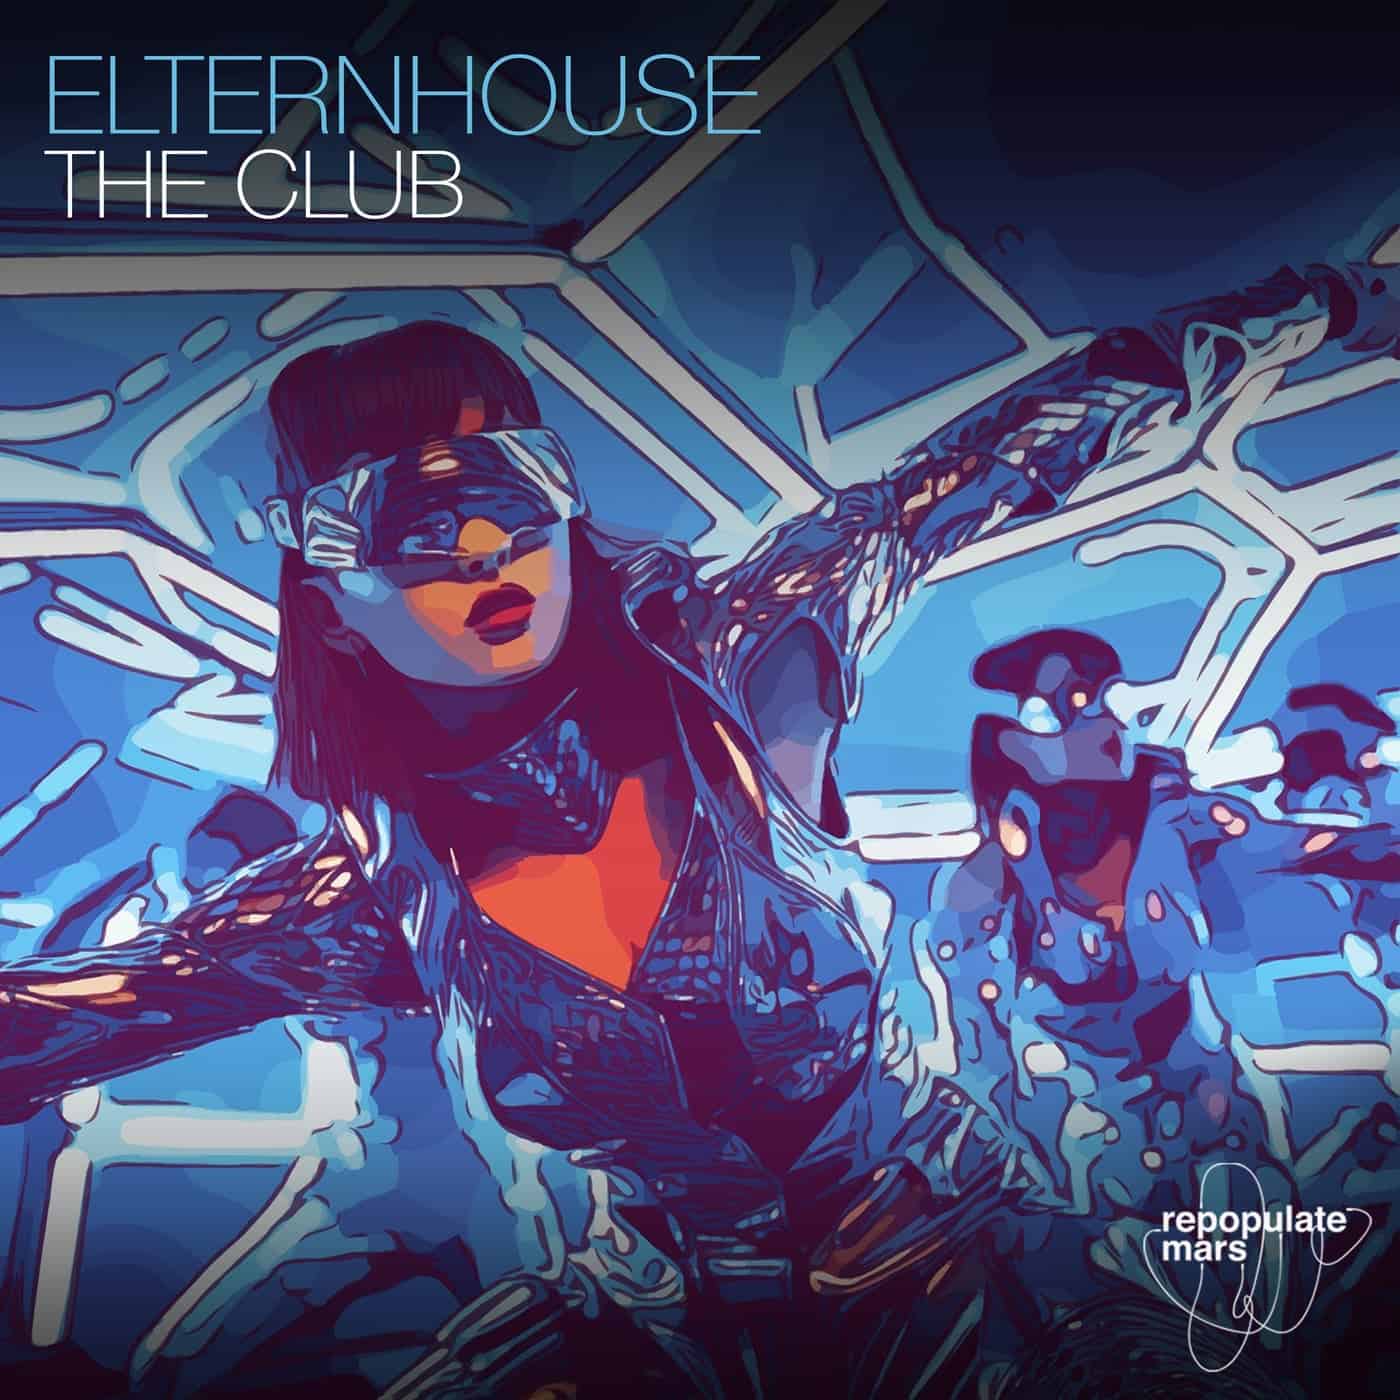 image cover: The Club by Elternhouse on Repopulate Mars